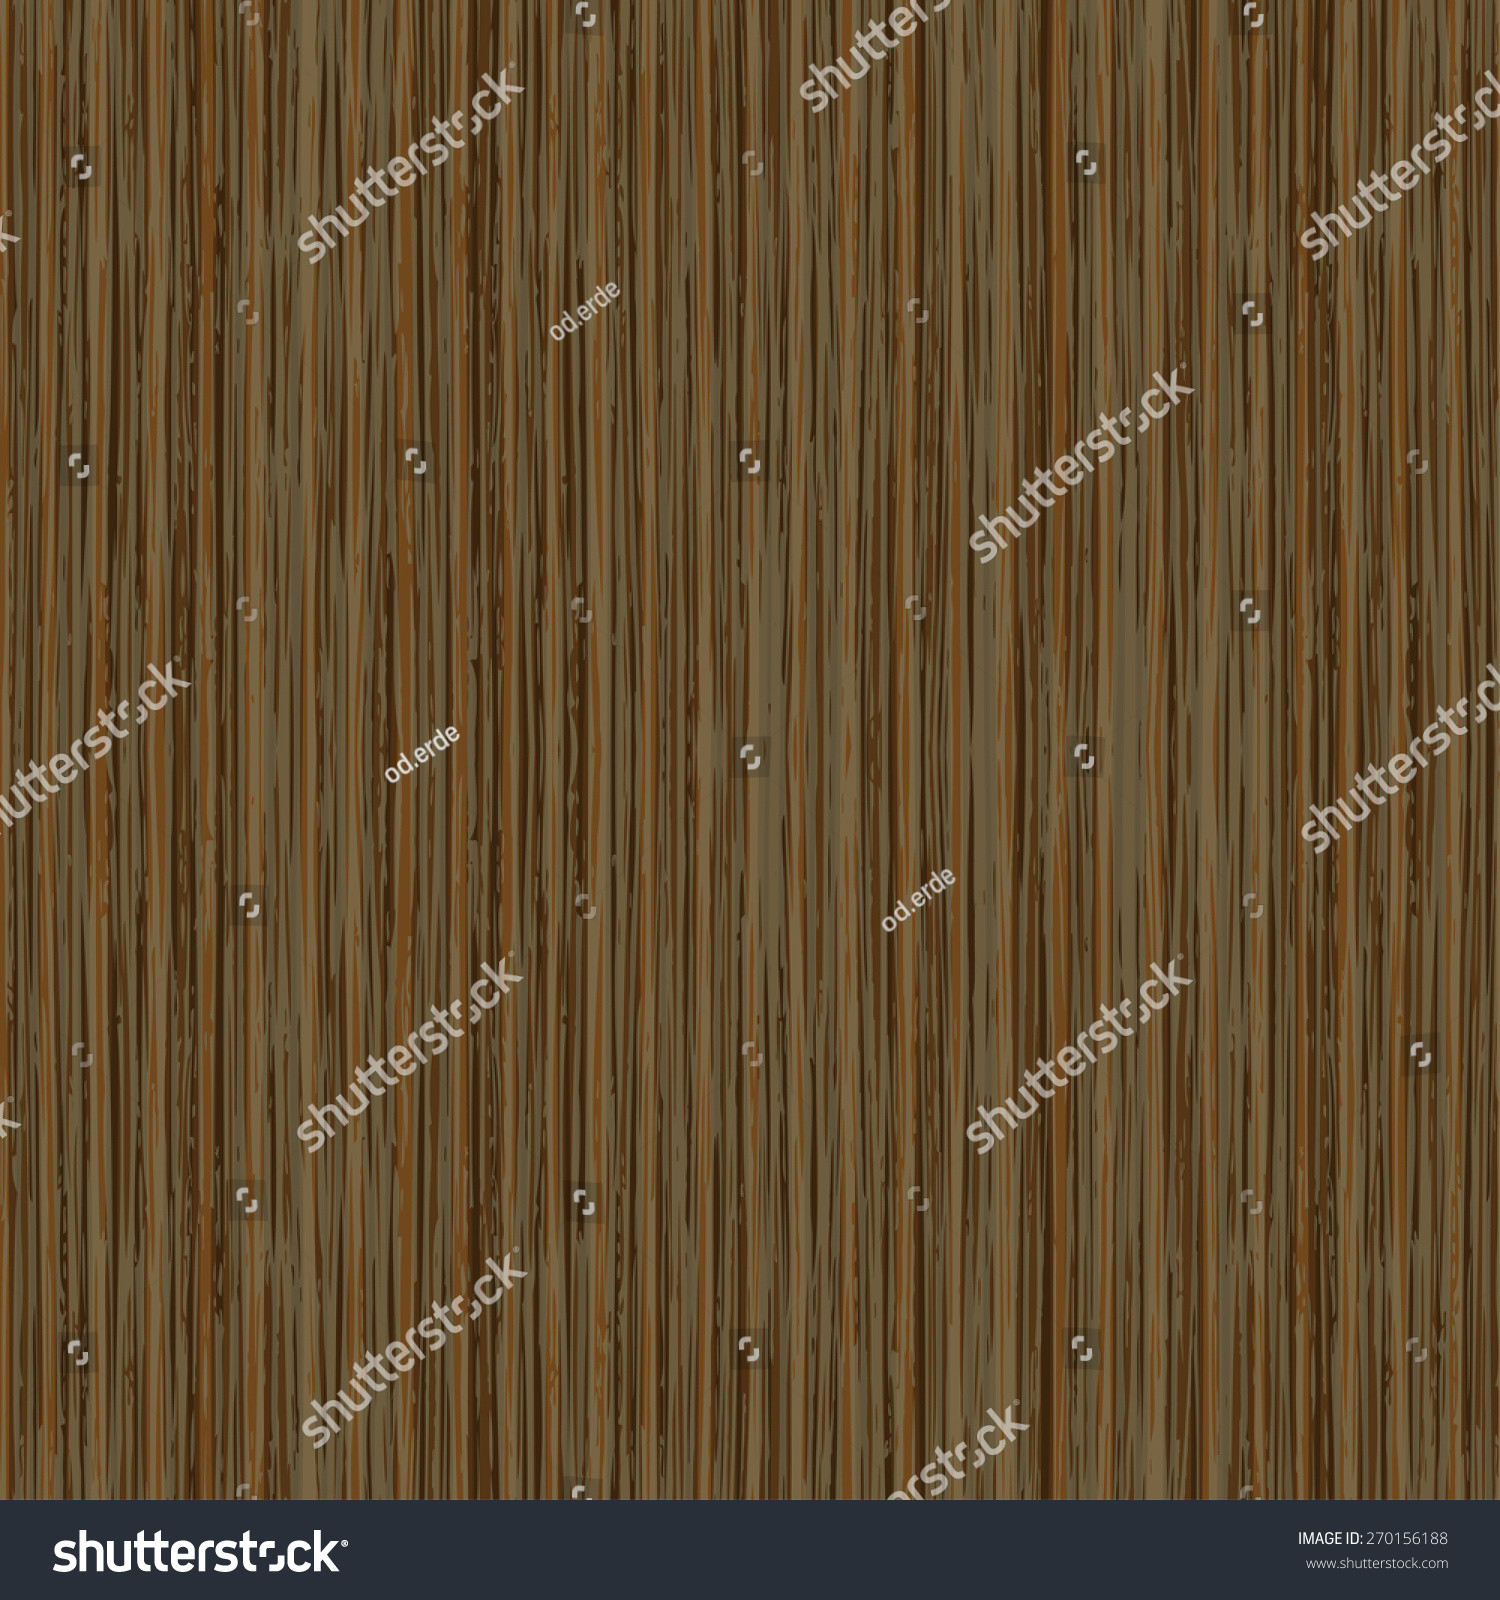 23 Ideal Hardwood Floor Texture Seamless 2024 free download hardwood floor texture seamless of wood texture web page background vector stock vector royalty free for welcome to shutterstock